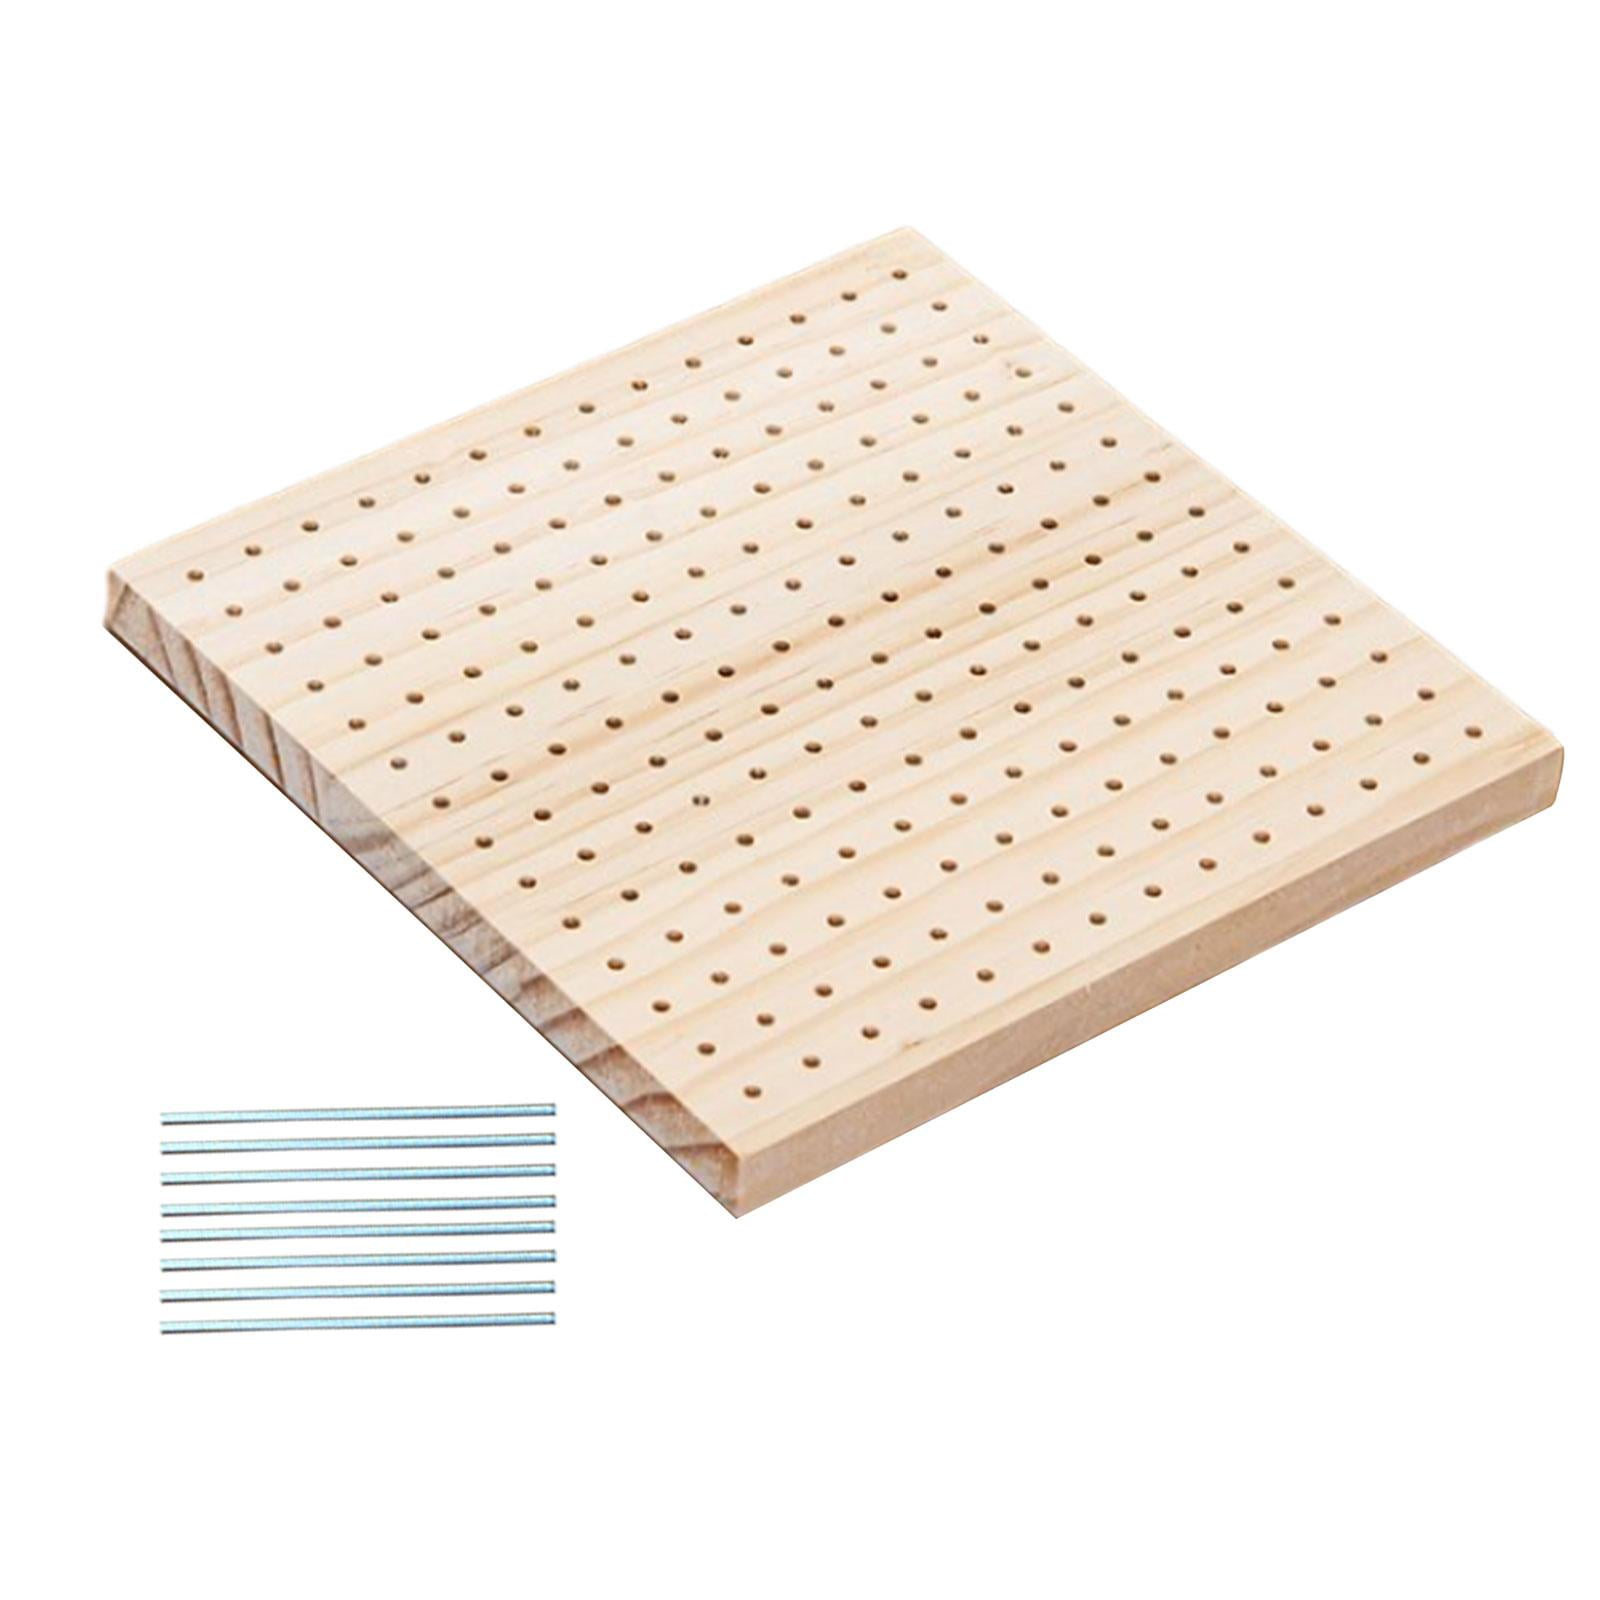 KnitIQ Blocking Mats for Knitting - Extra Thick Blocking Boards with Grids  with 100 T-pins